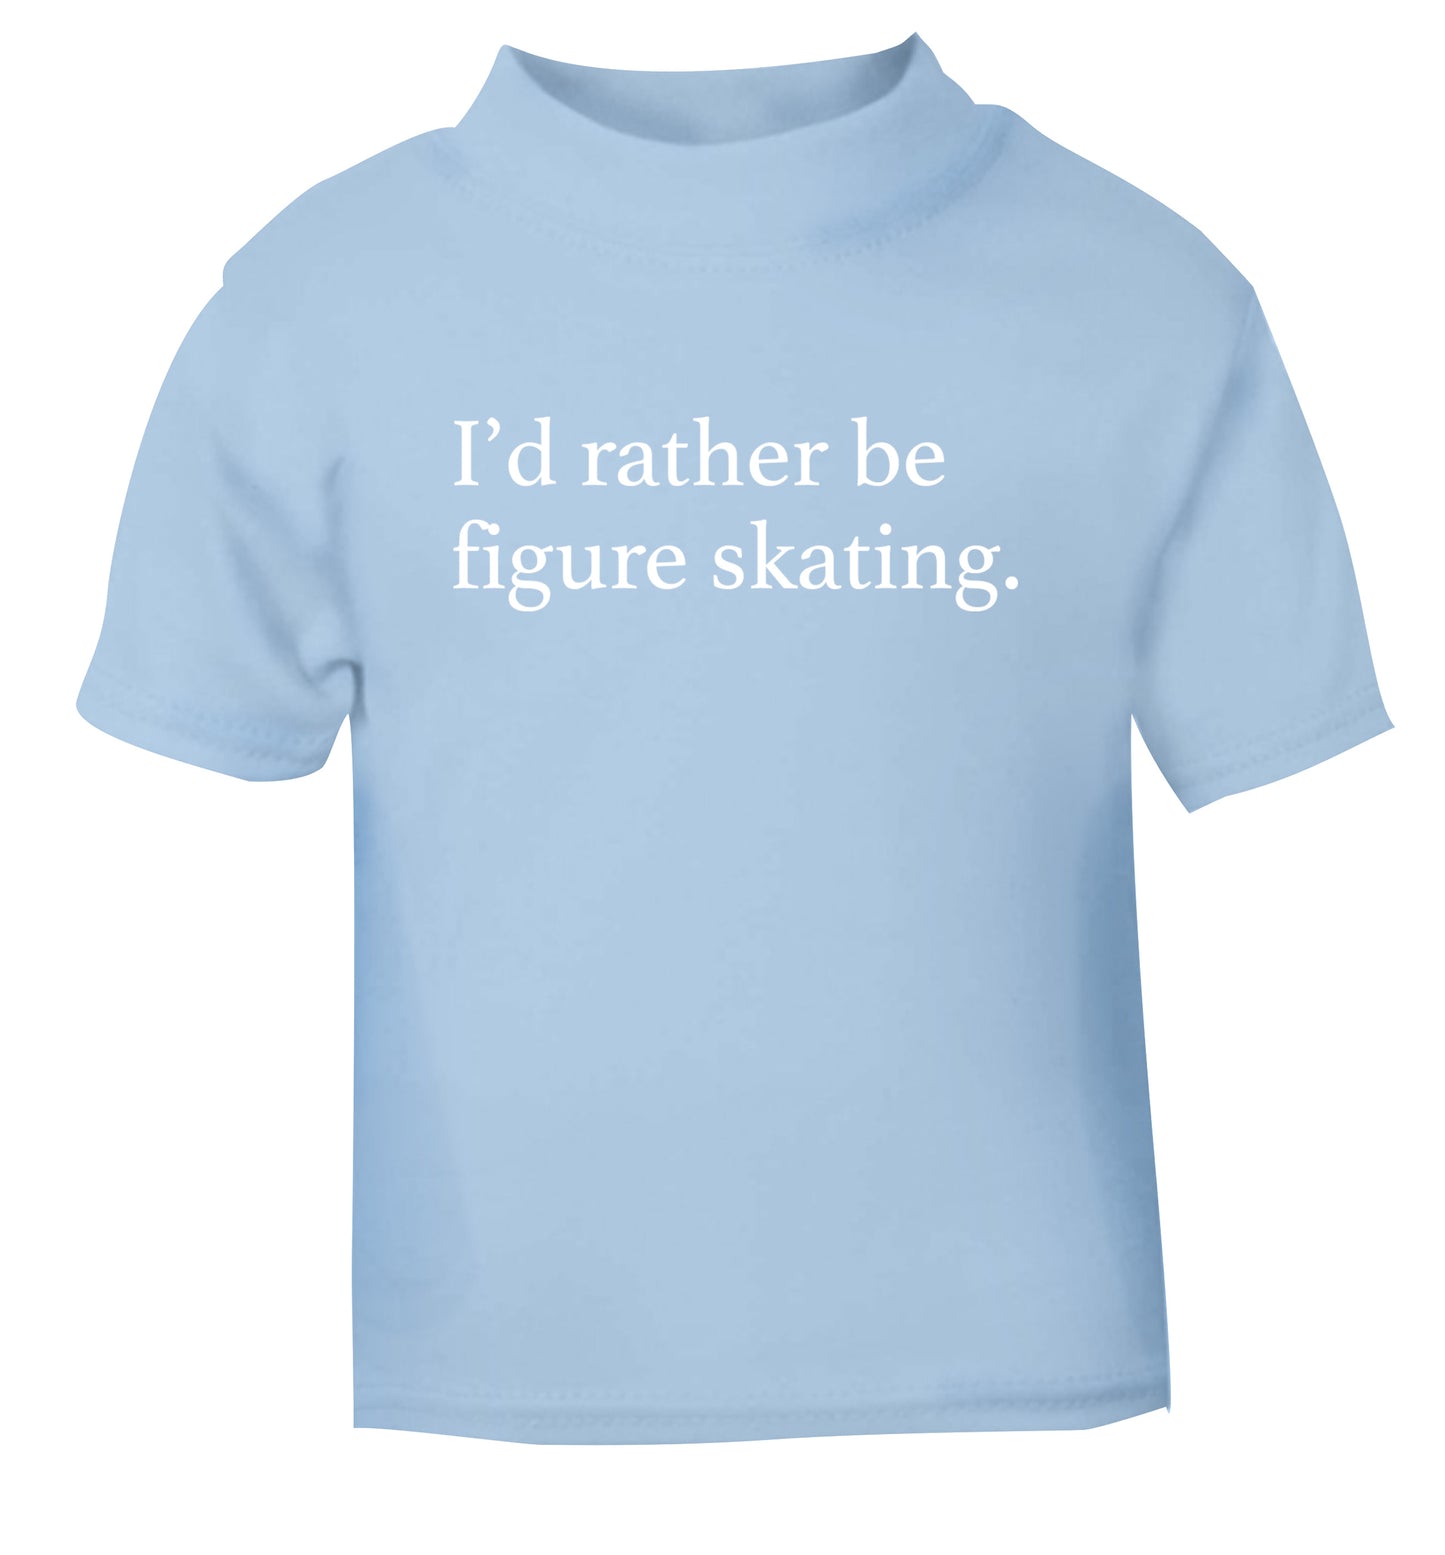 I'd rather be figure skating light blue Baby Toddler Tshirt 2 Years